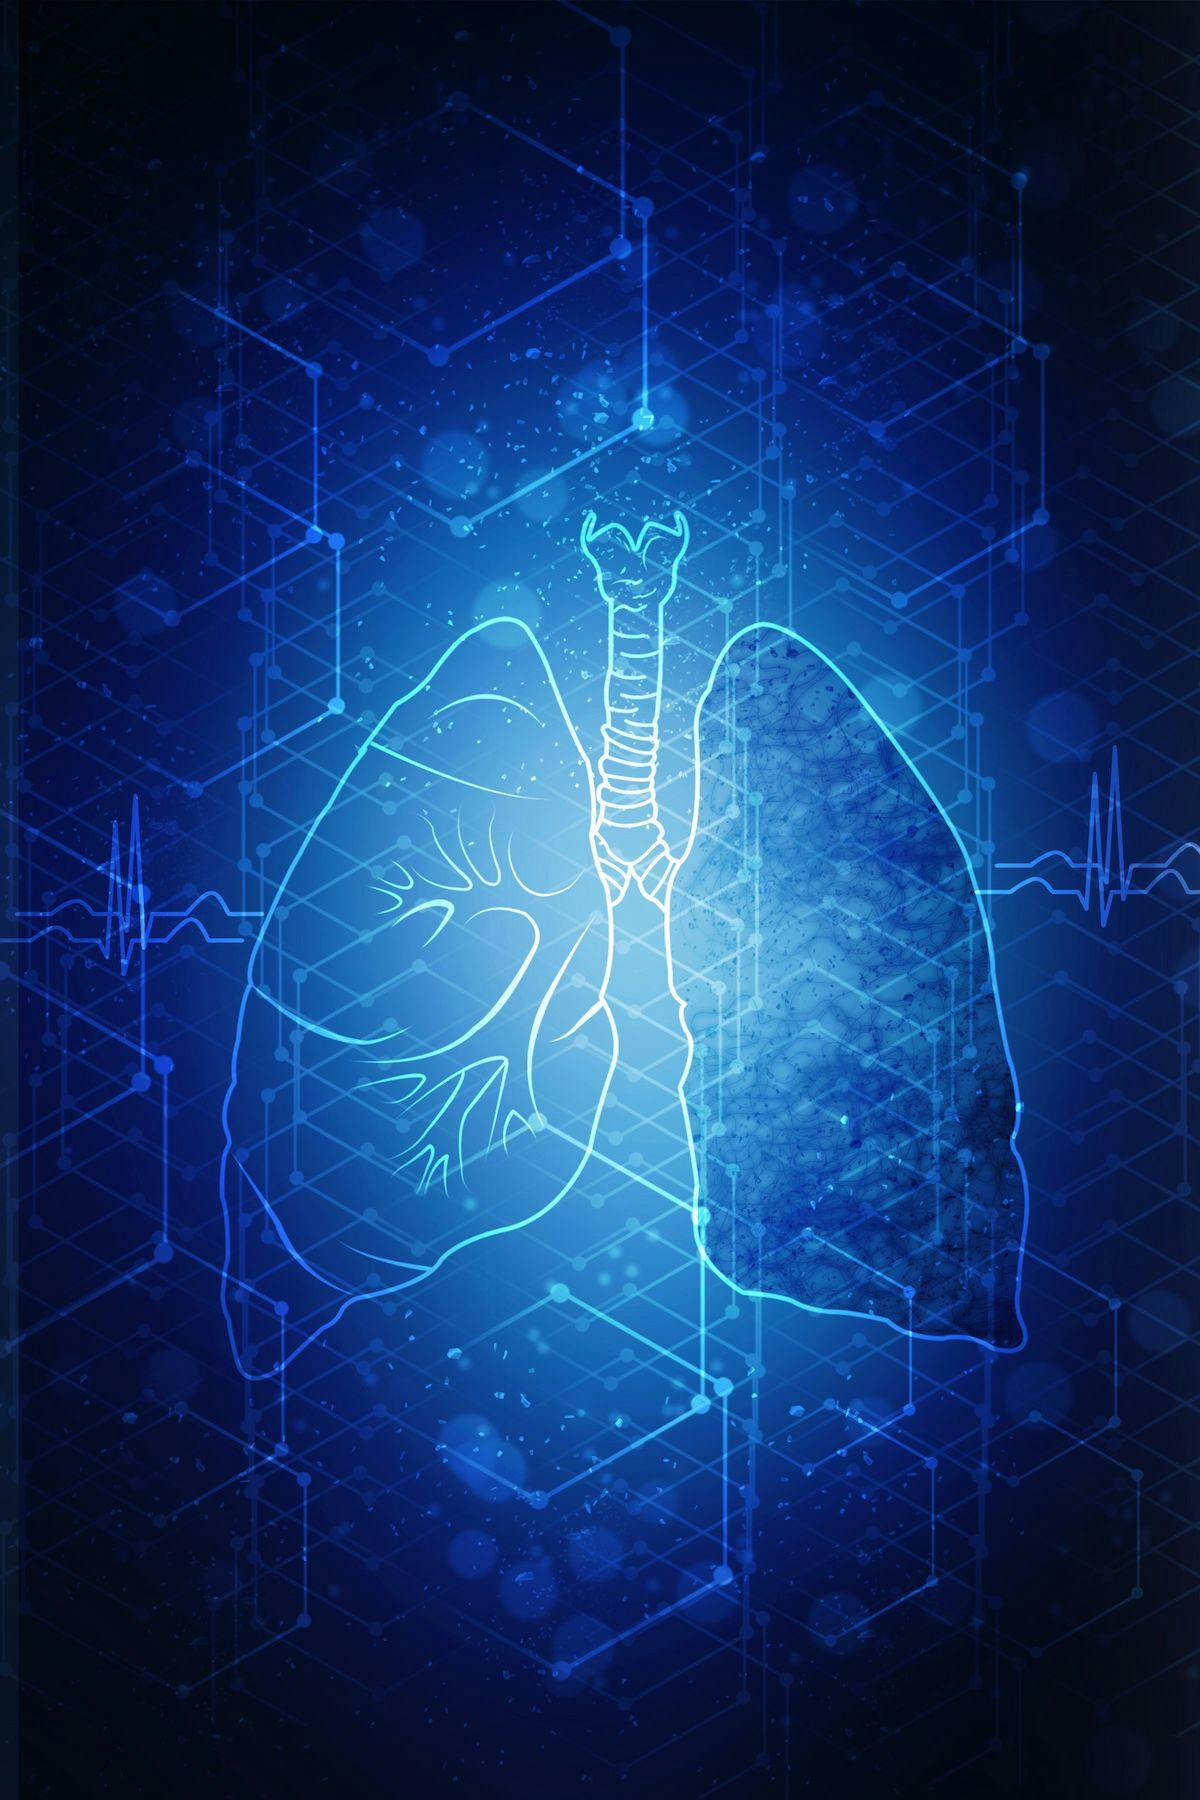 Iruplinalib appears tolerable with no new safety signals among patients with locally advanced and metastatic ALK-positive non–small cell lung cancer in the phase 3 INSPIRE trial.